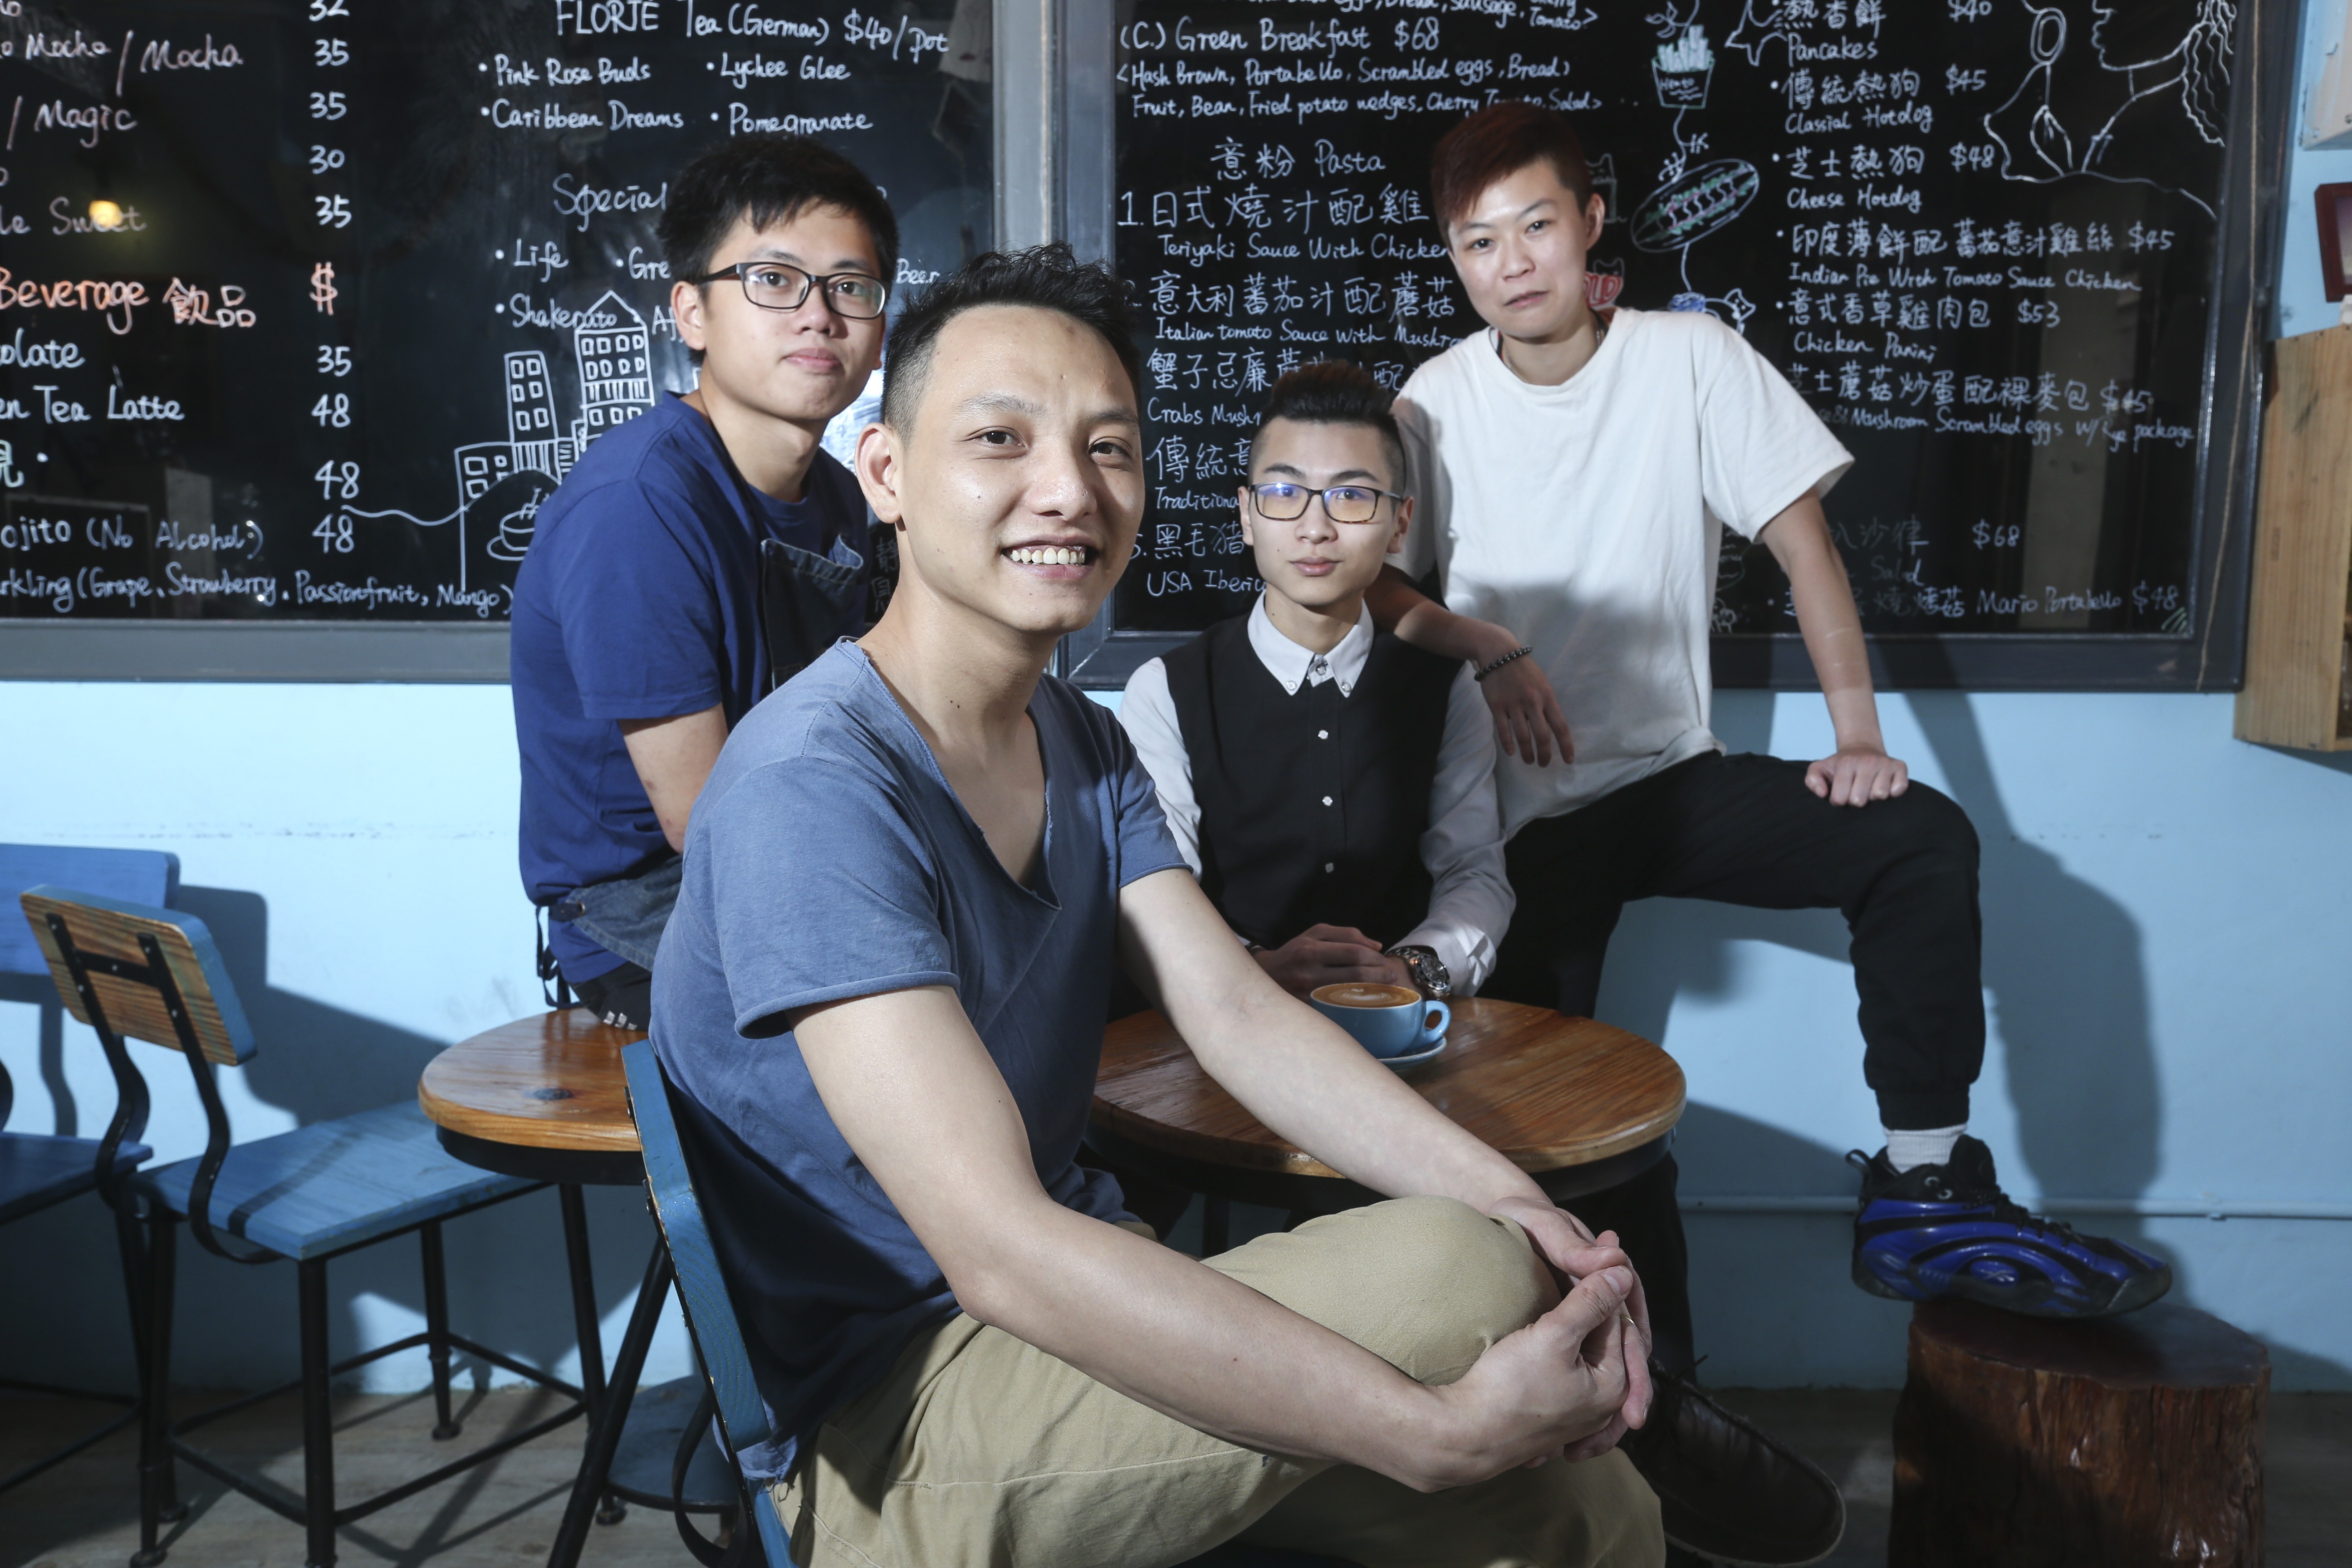 Cafe Heato owner Amen Chan Hoi-yuen (front) with his staff members (from left to right, behind) Wong Man-hon, Lam Ka-lun and Lai Ho-ching. Photo: K. Y. Cheng